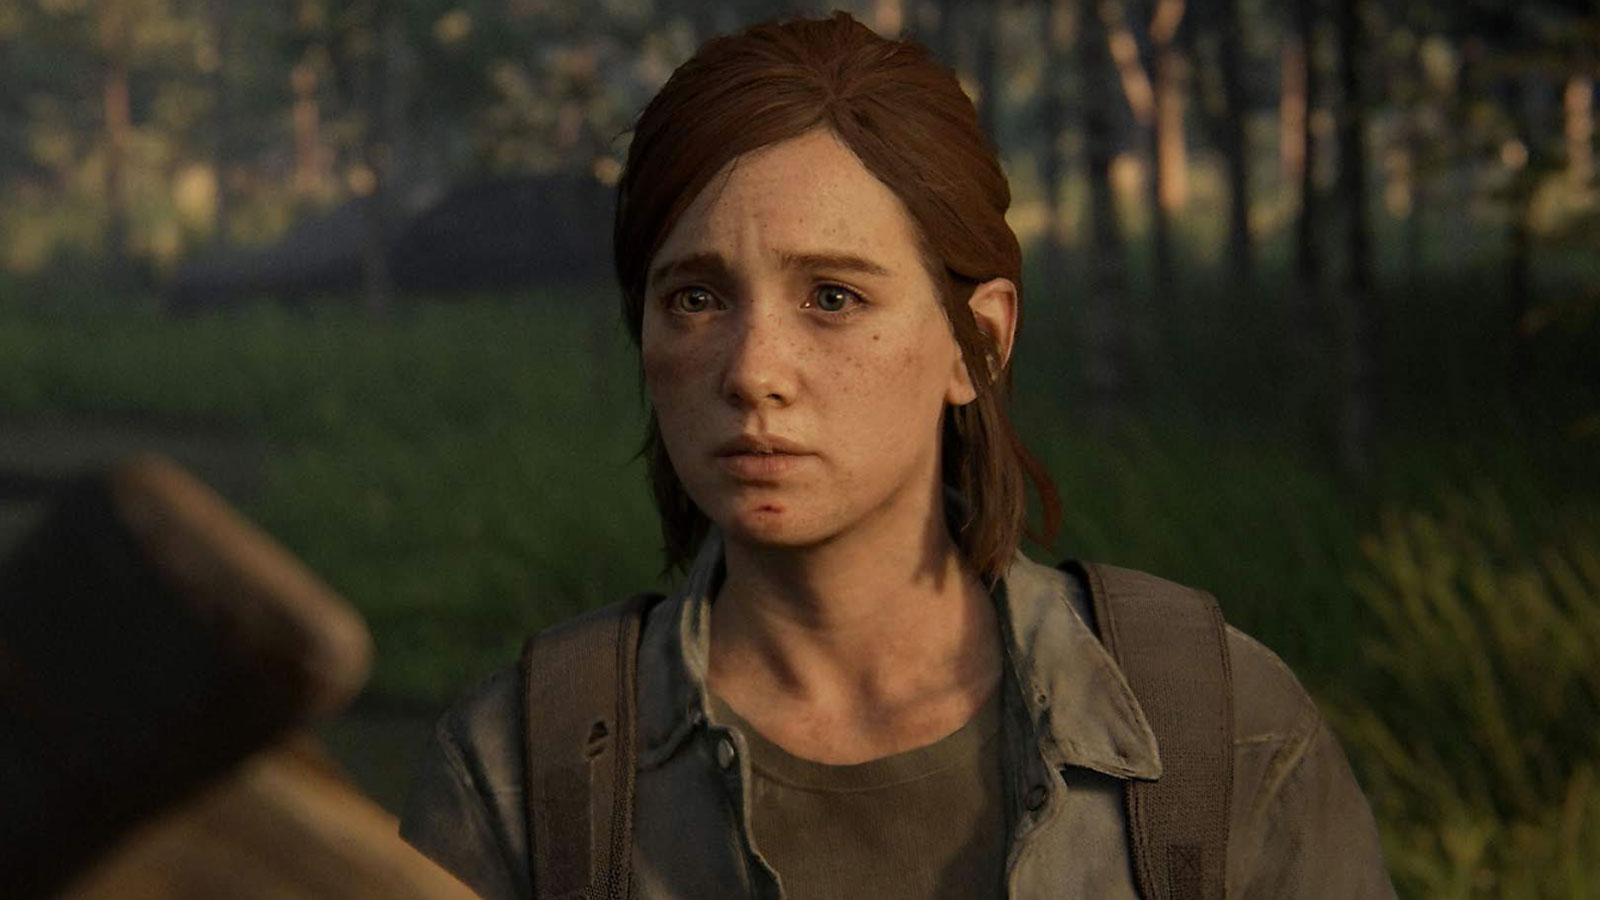 The Last of Us 2 Review - A striking reminder of Naughty Dog's brilliance -  One More Game